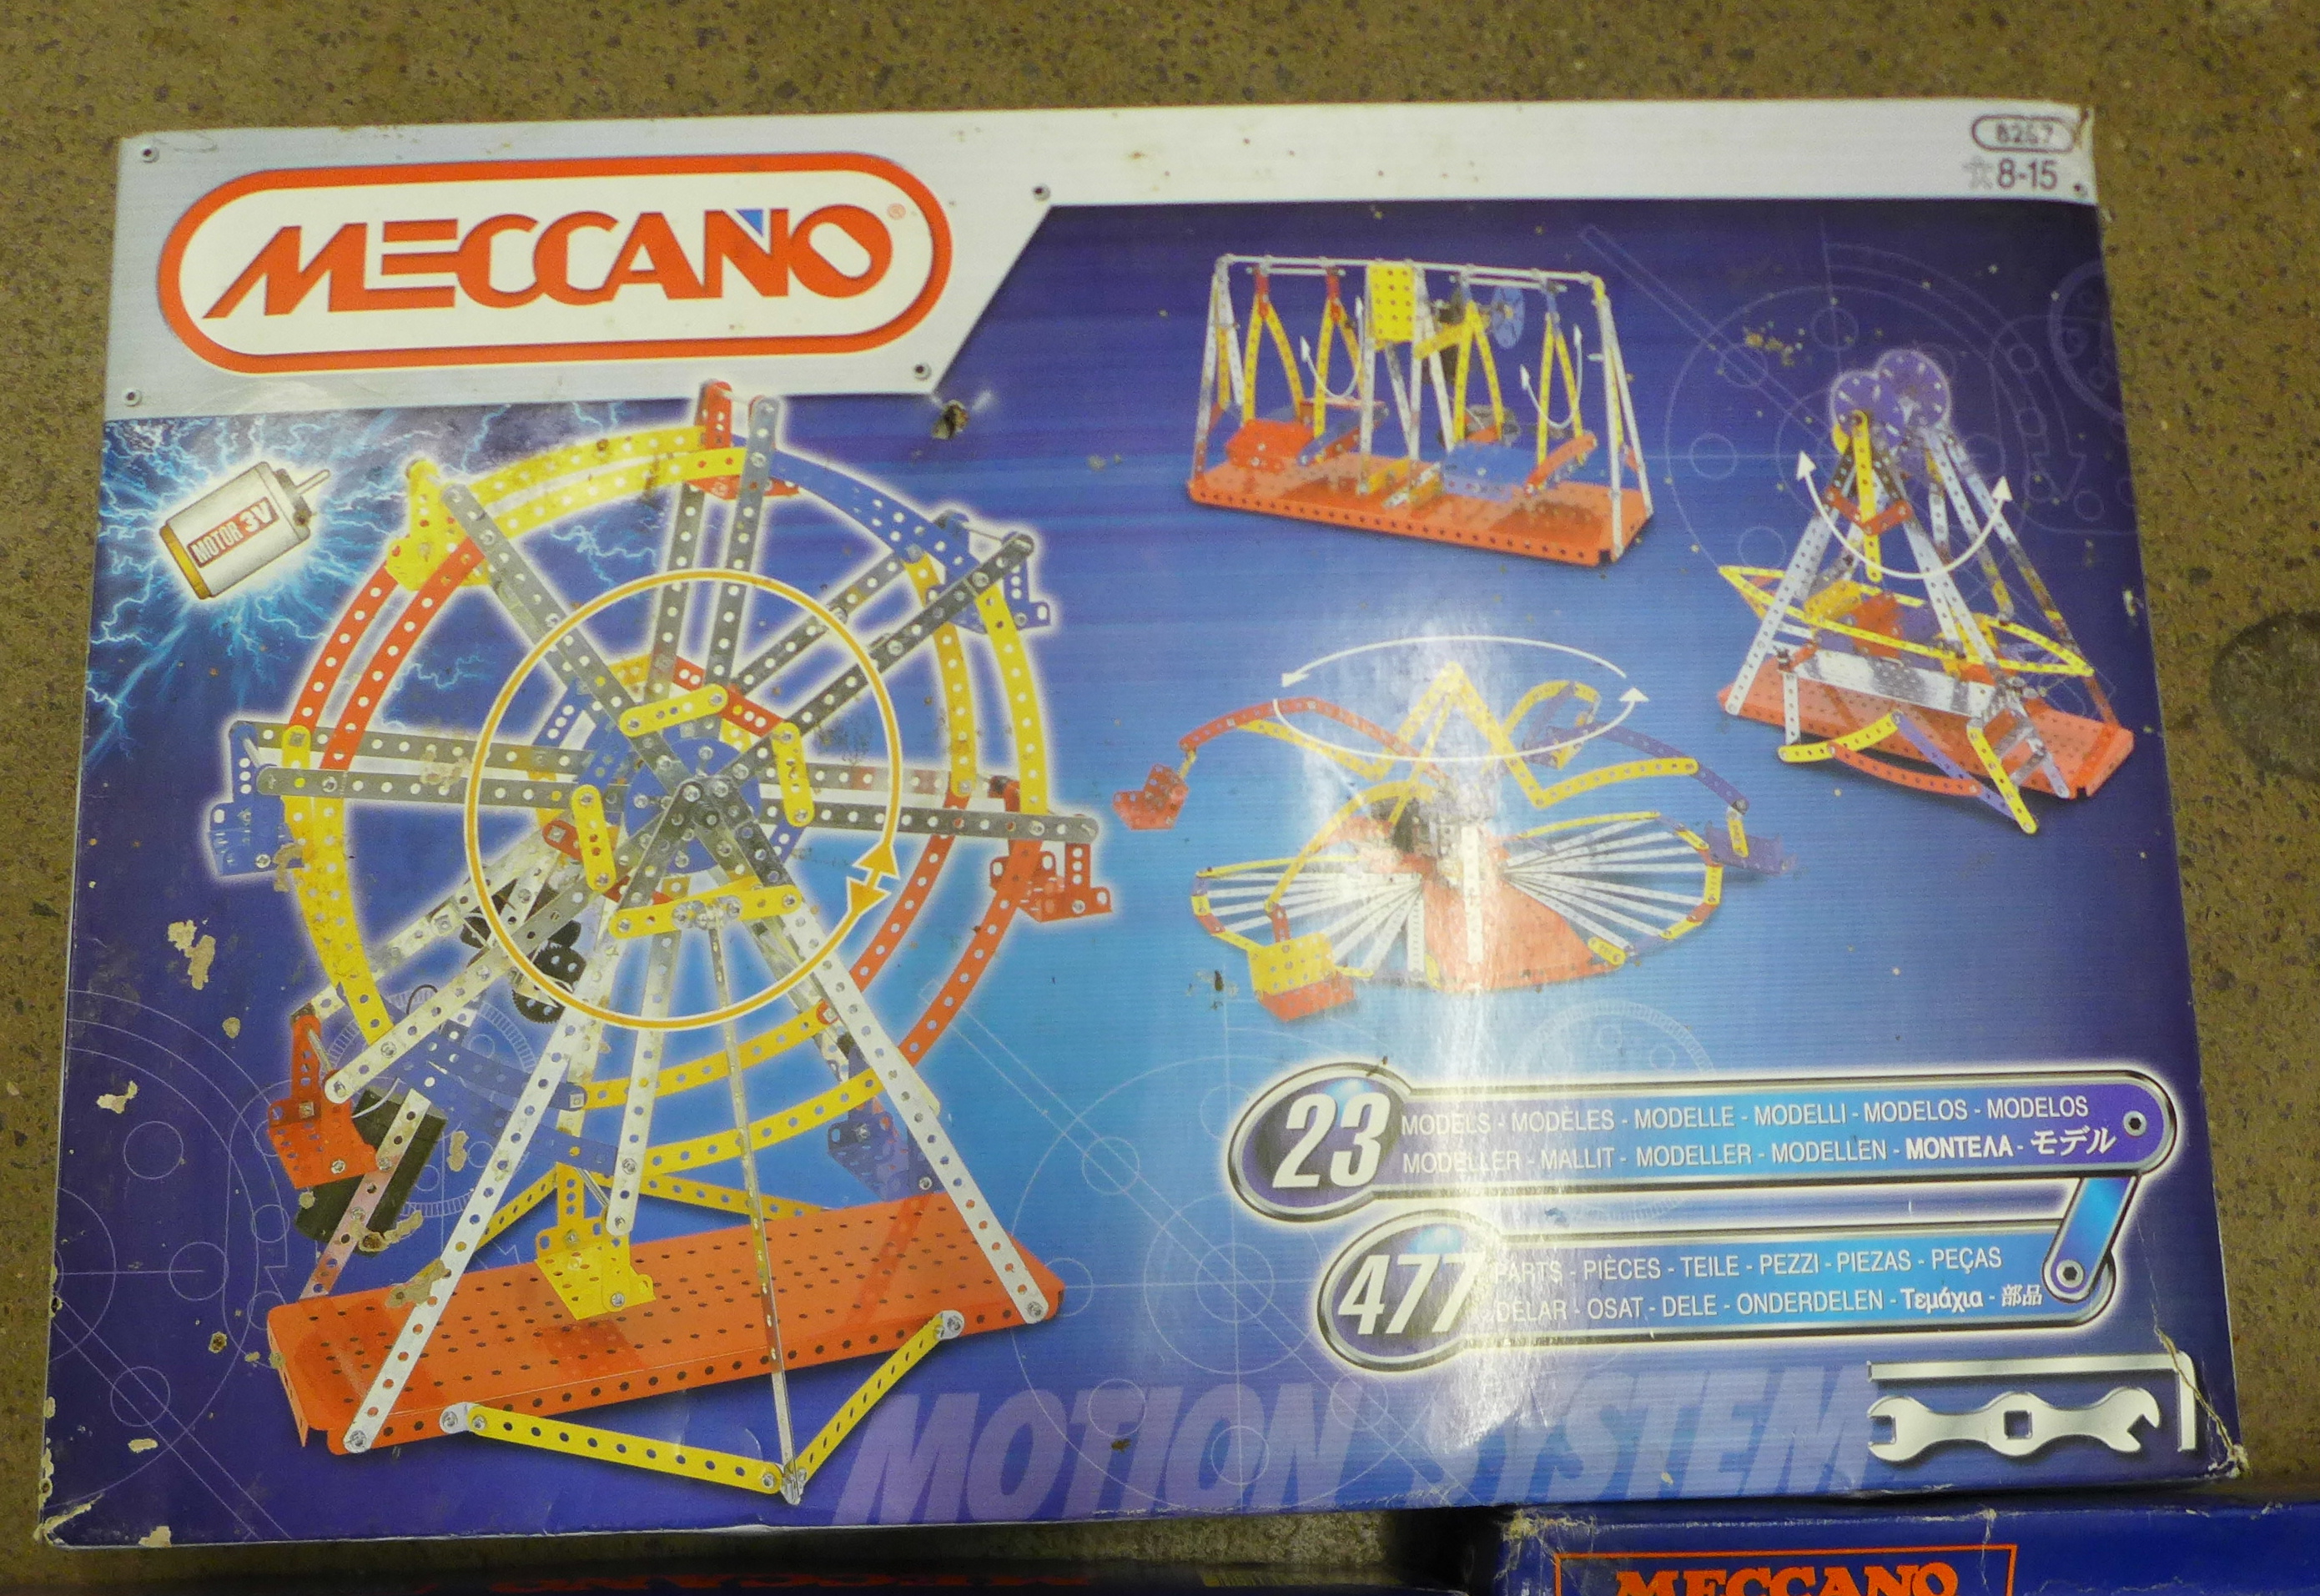 Eight boxed set of Meccano **PLEASE NOTE THIS LOT IS NOT ELIGIBLE FOR IN-HOUSE POSTING AND PACKING** - Image 8 of 8